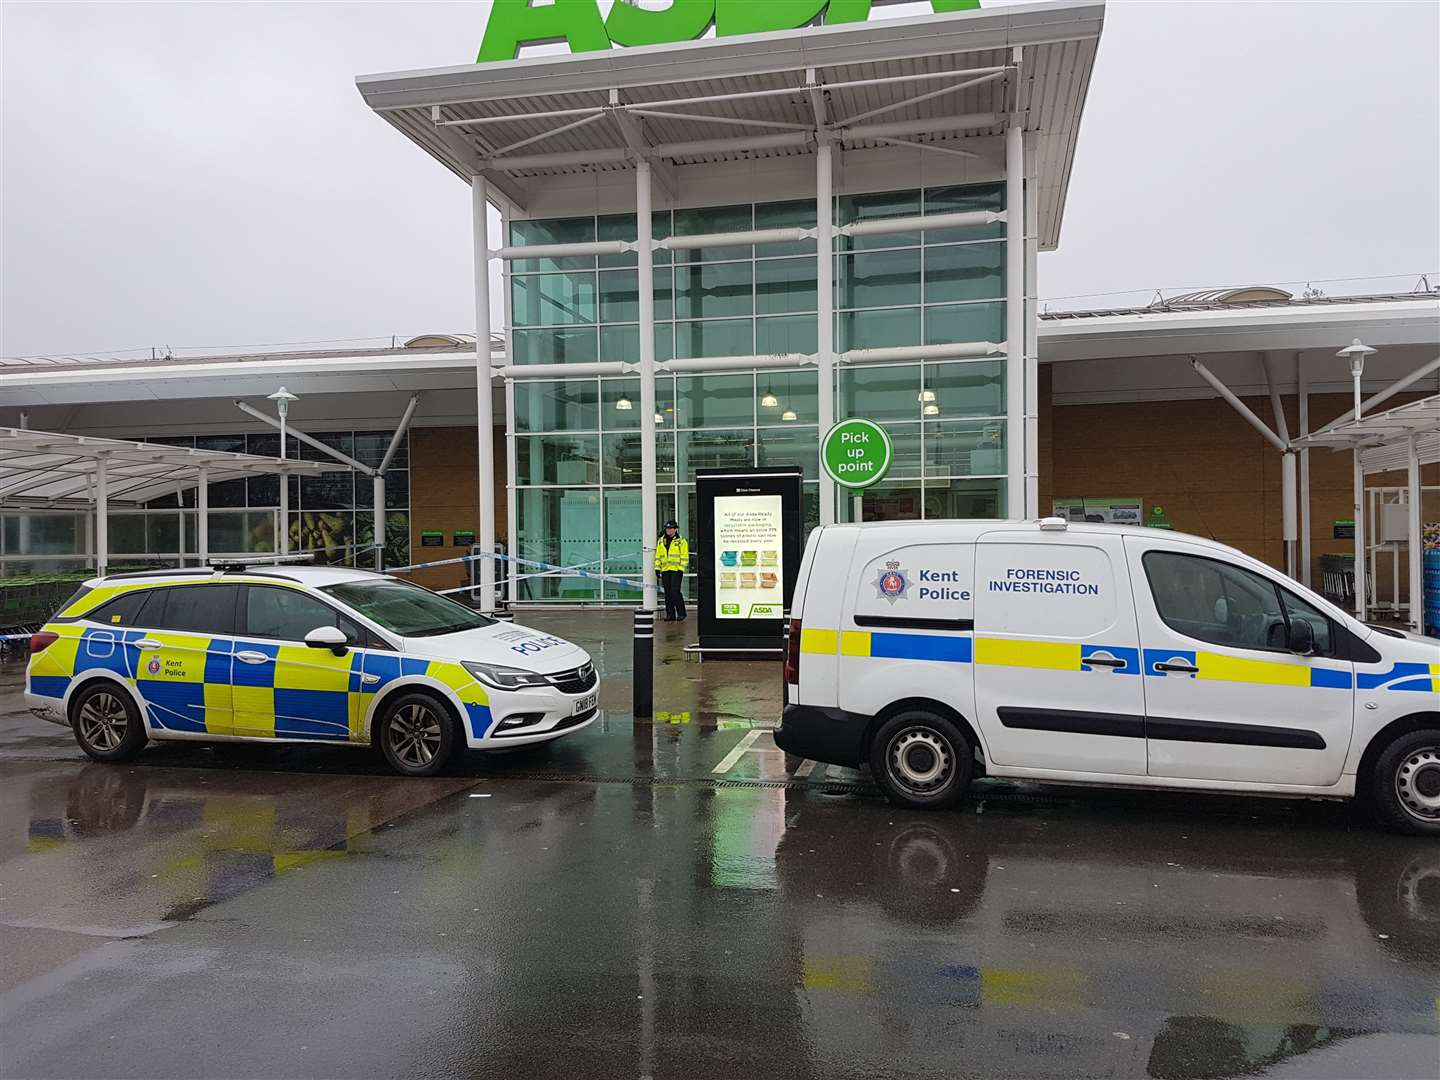 Police vehicles parked outside Asda in Ashford this morning (22595028)